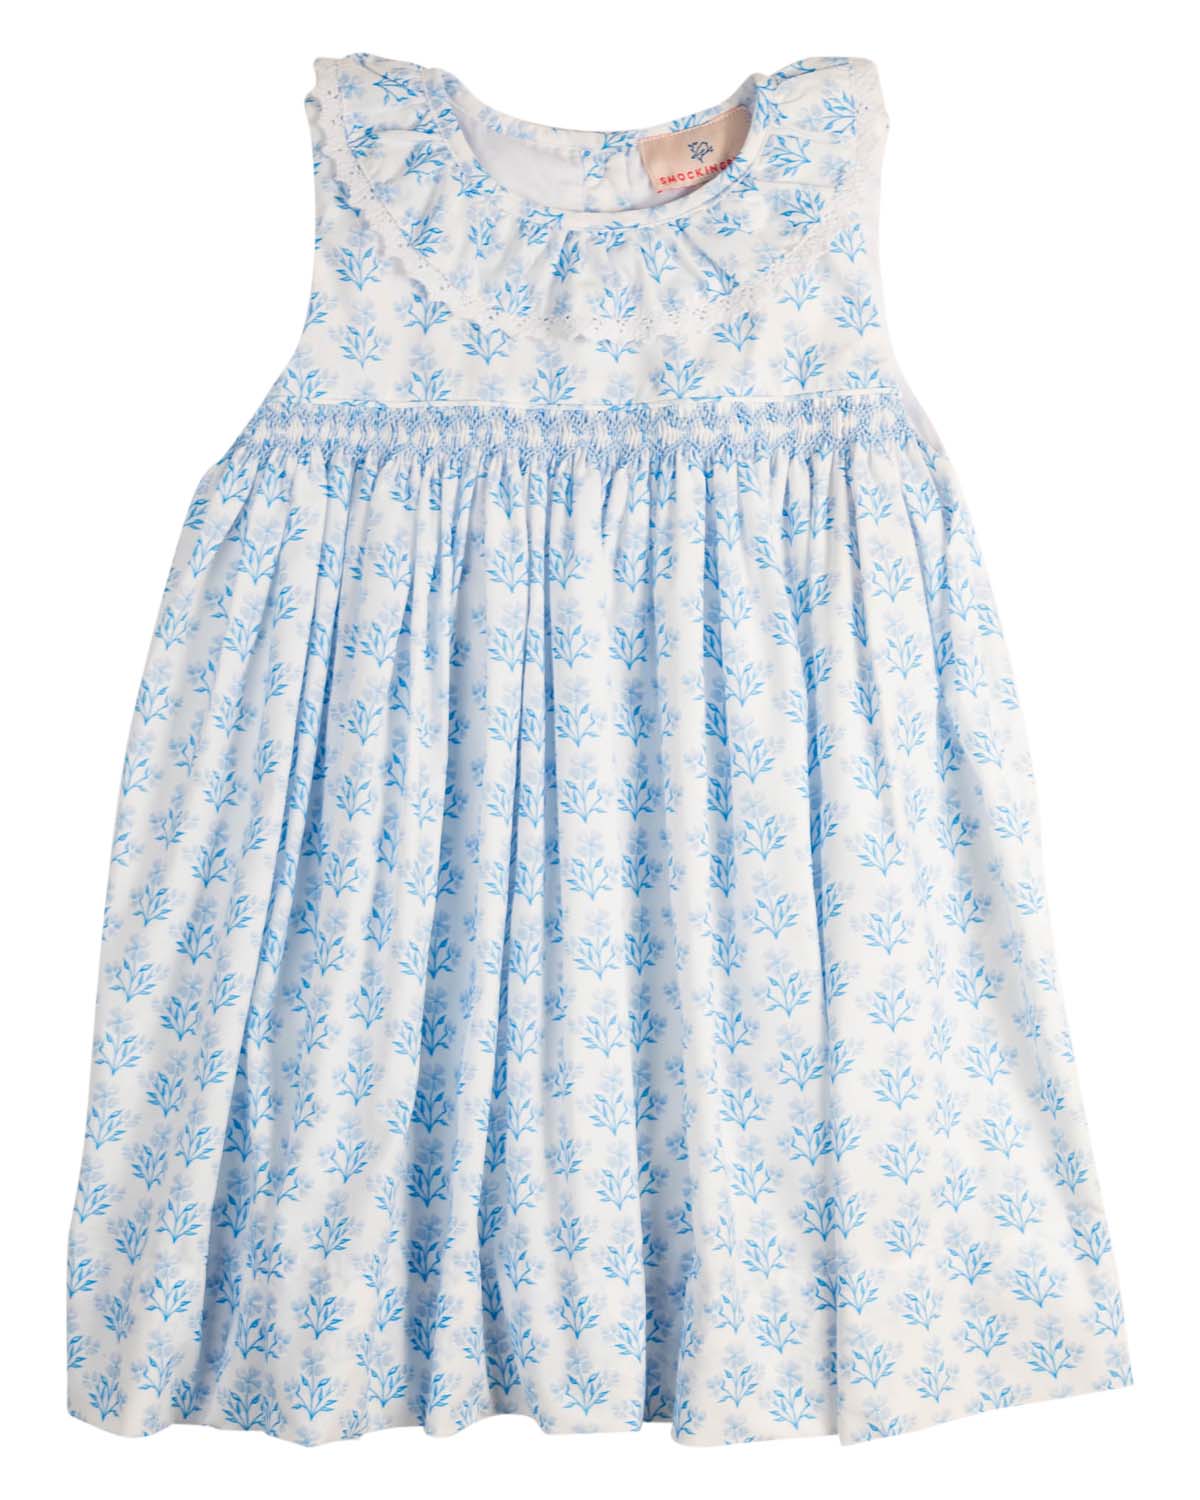 Blue Floral Fields Smocked Dress with Ruffle Collar